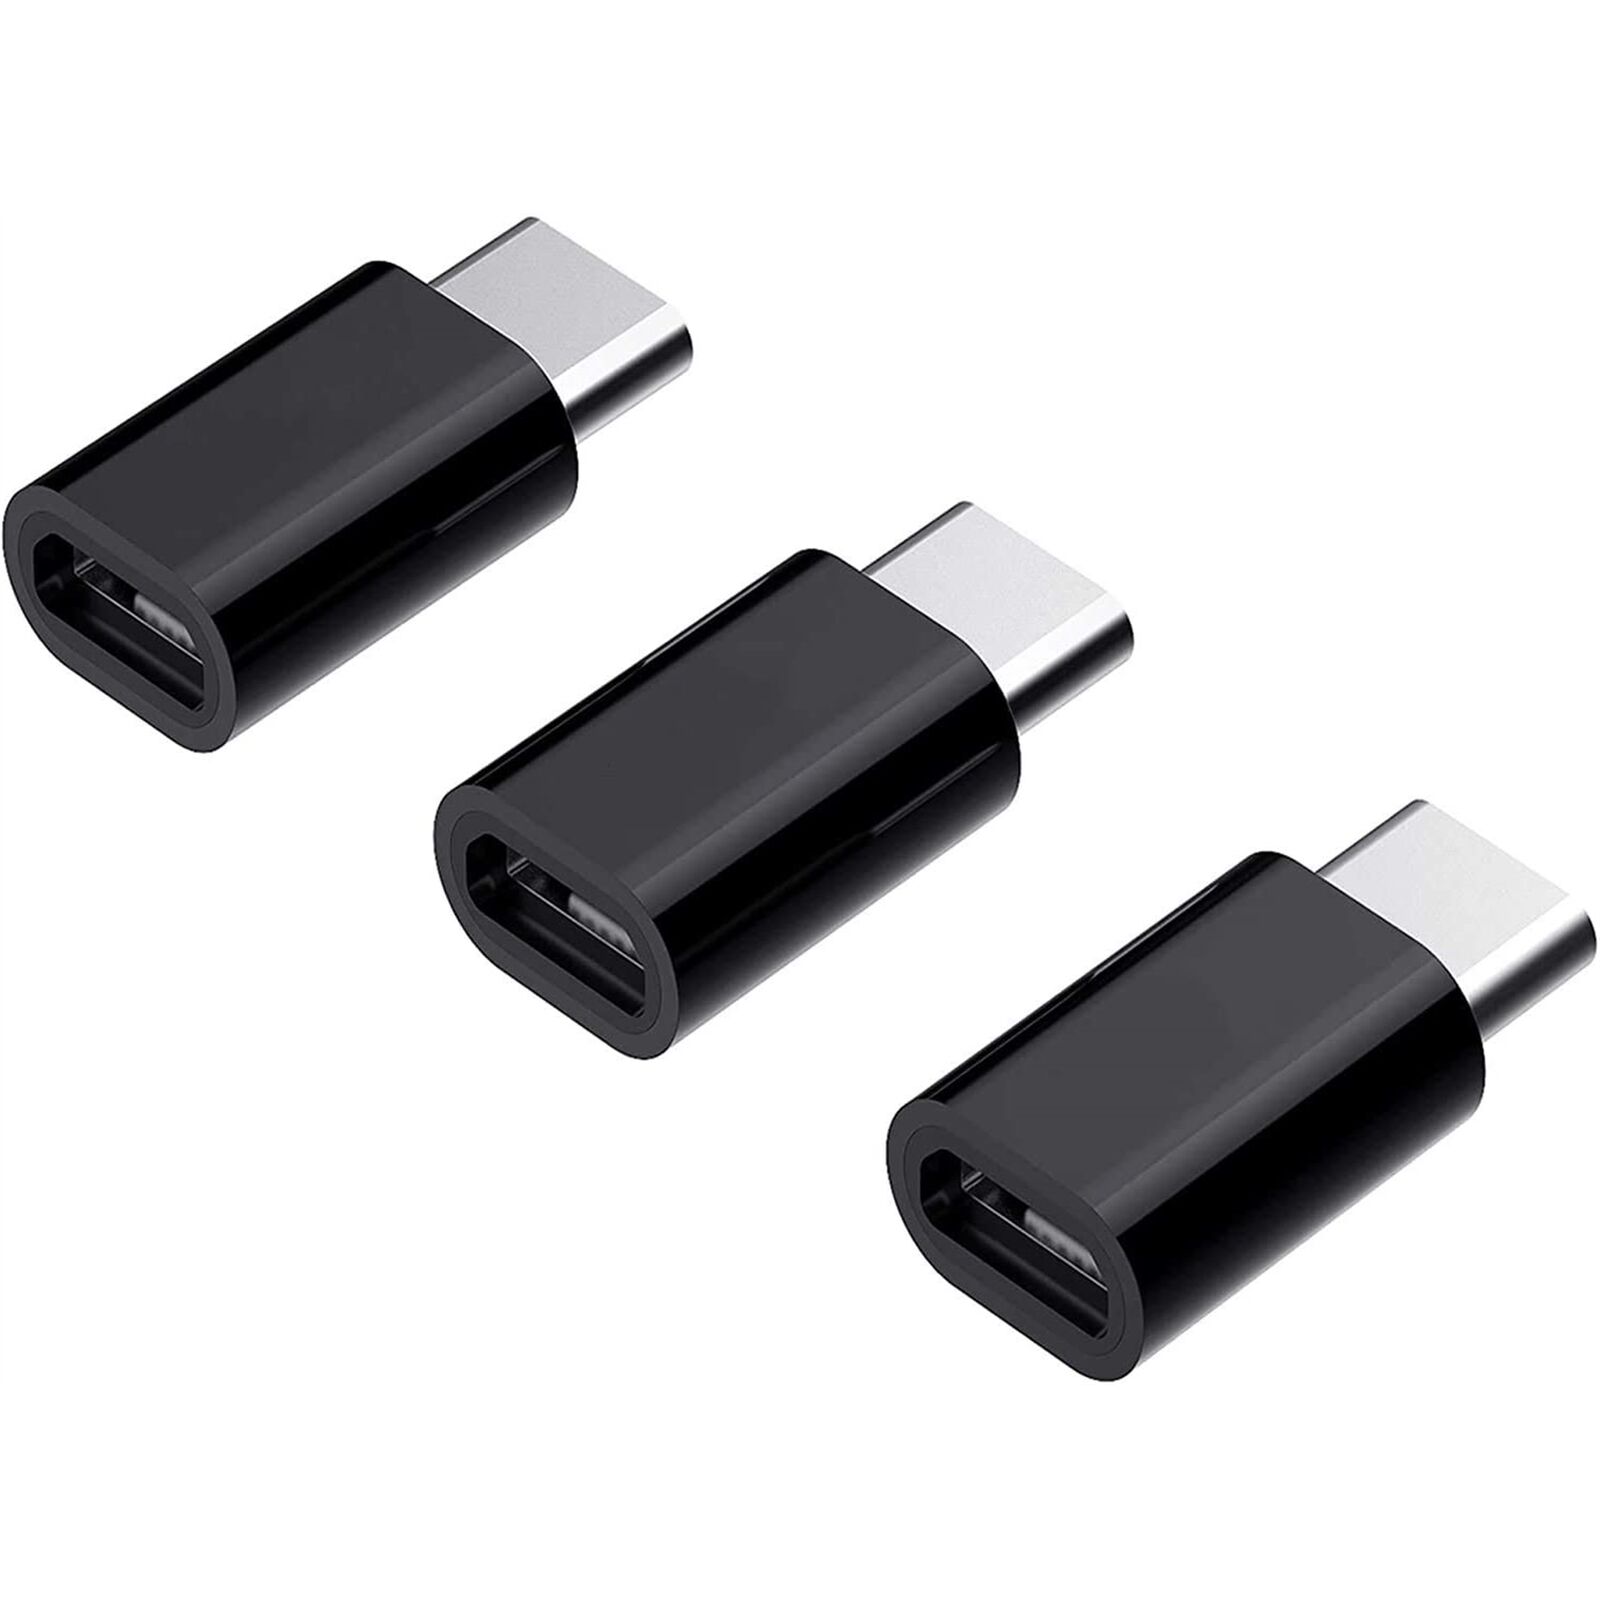 USB-C Adapter to Micro USB (3-Pack) OTG Supported with 56k Resistor Data Sync an